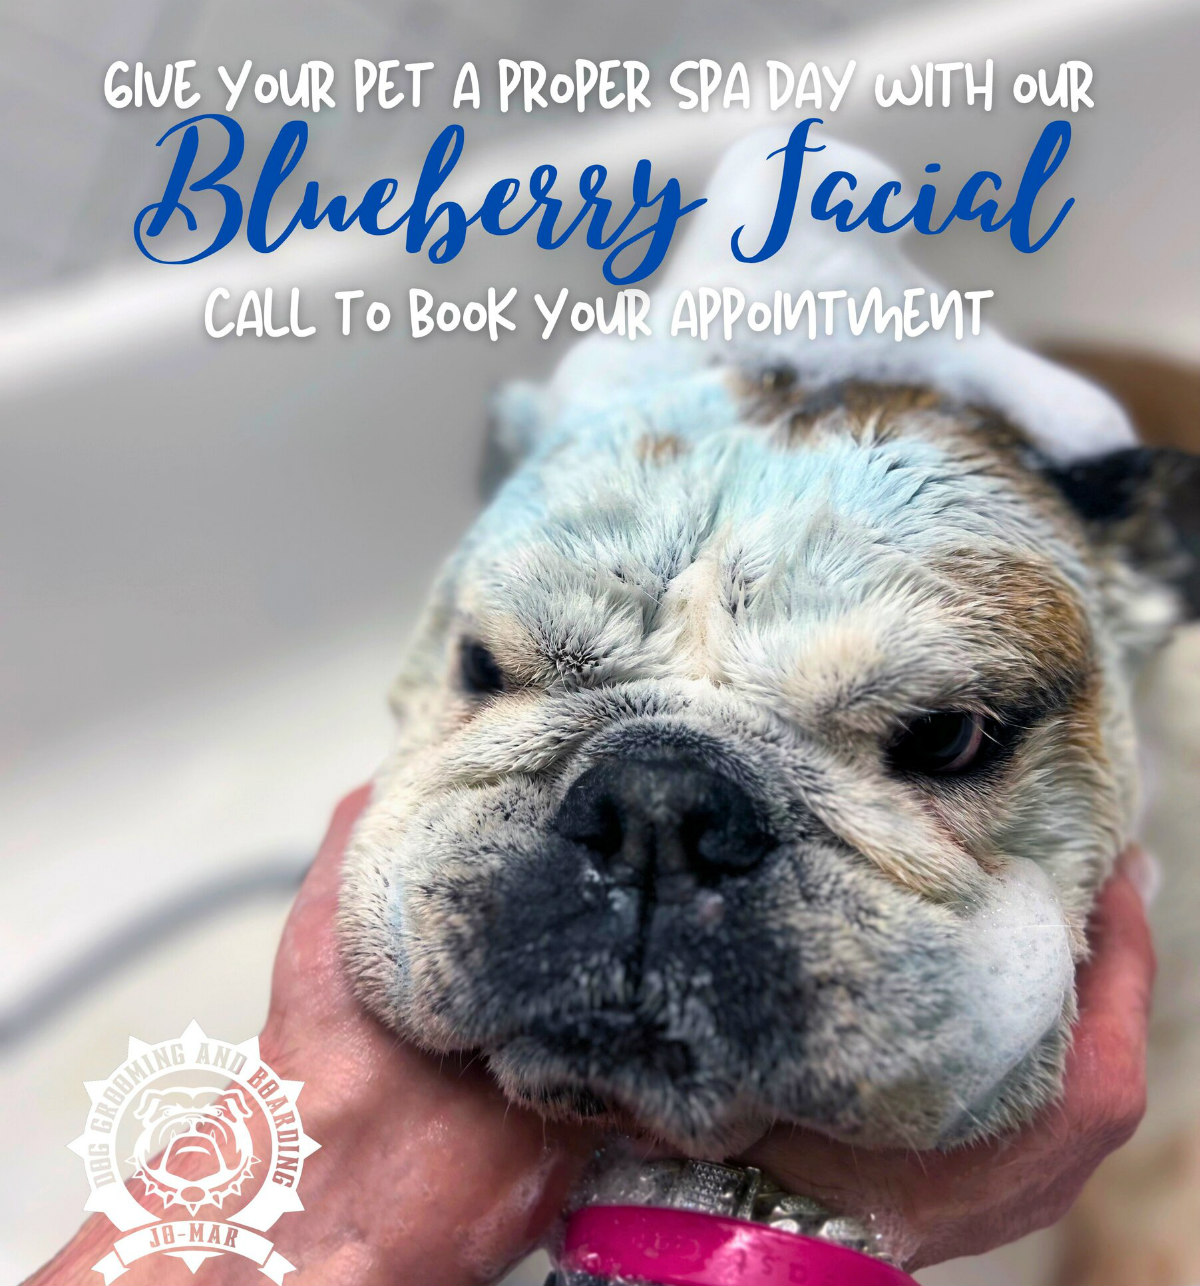 Blueberry Facial Promotion Flyer